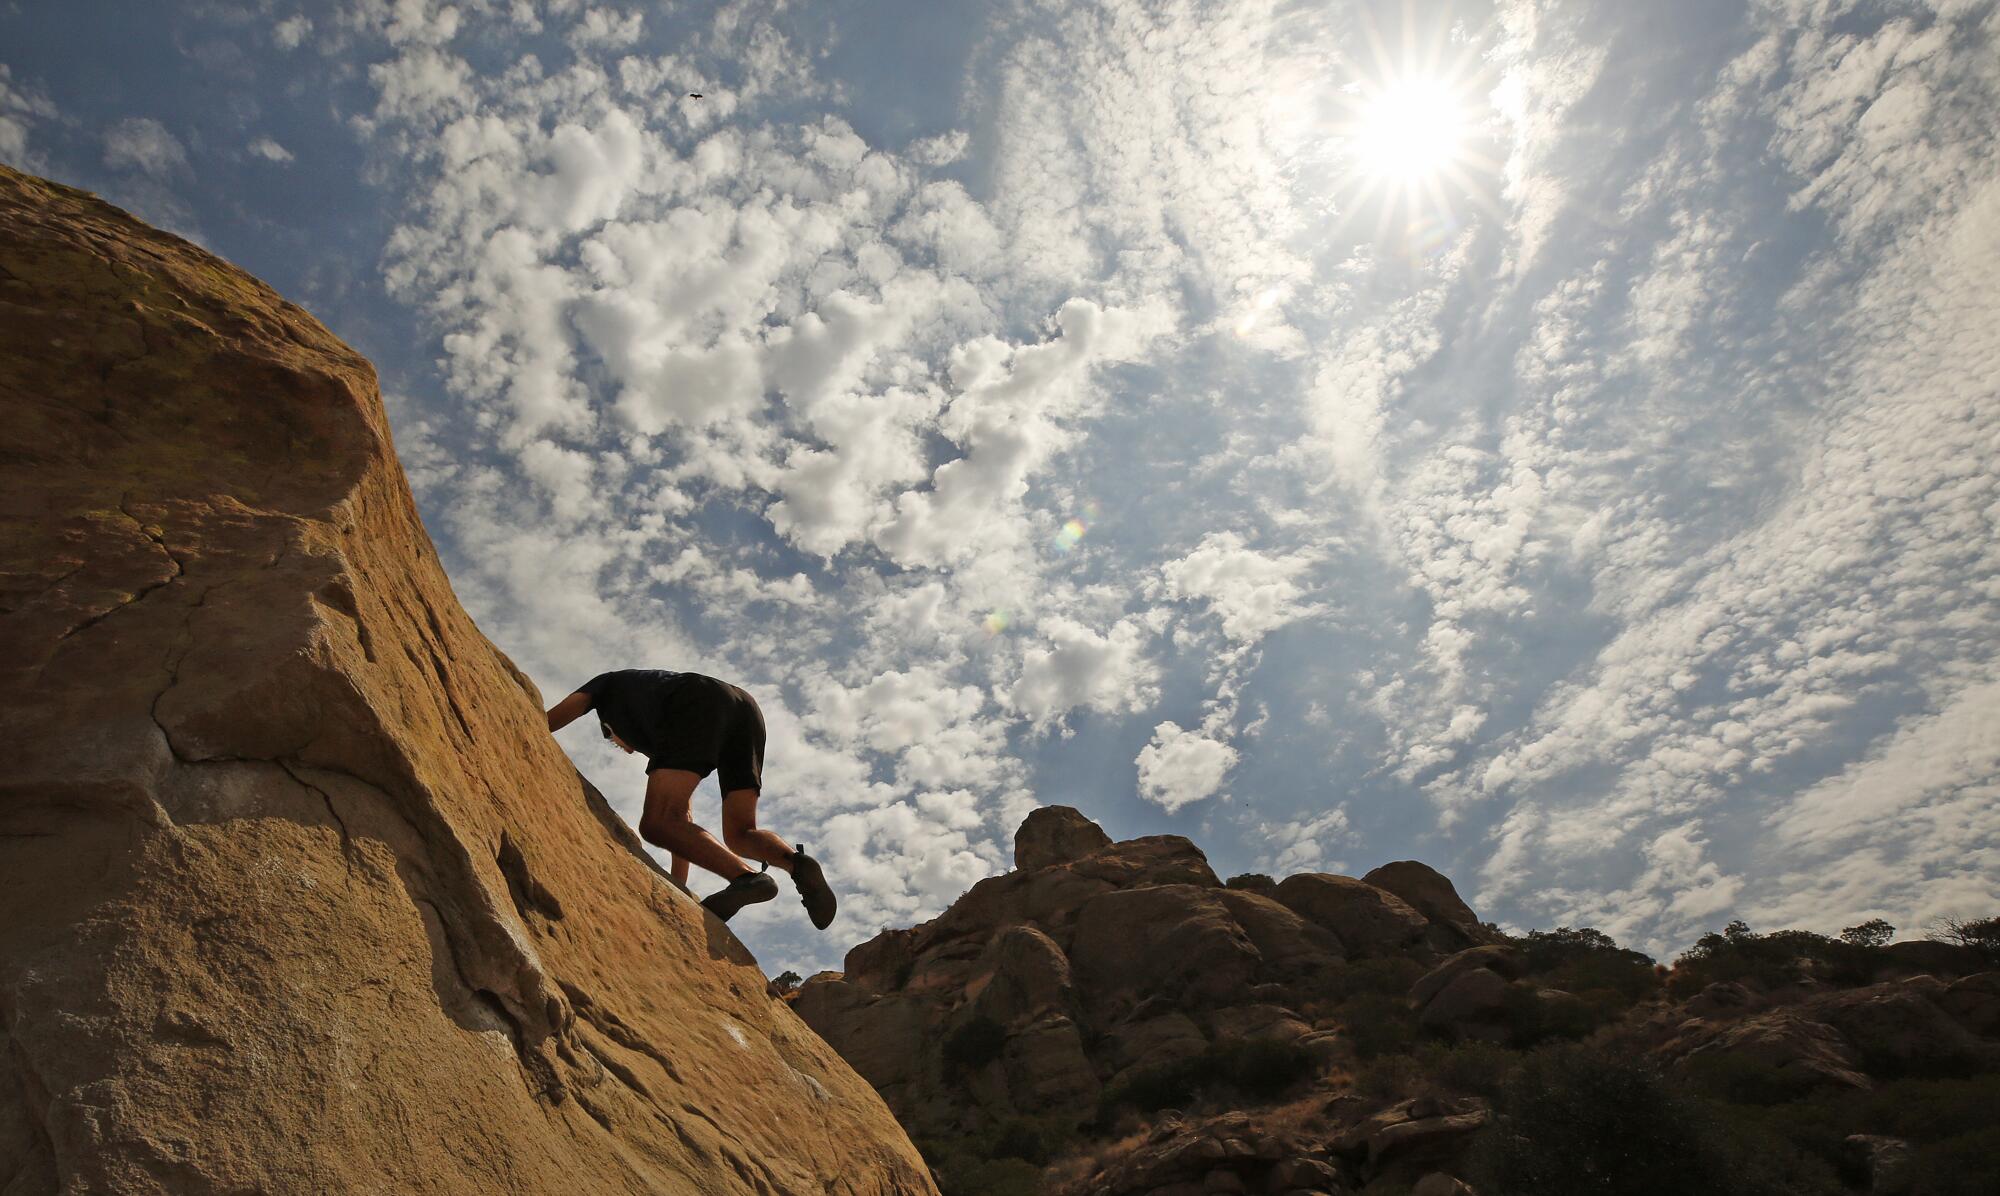 Josh Puchalski practices his bouldering skills at Stoney Point Park in Chatsworth before temperatures began to soar.